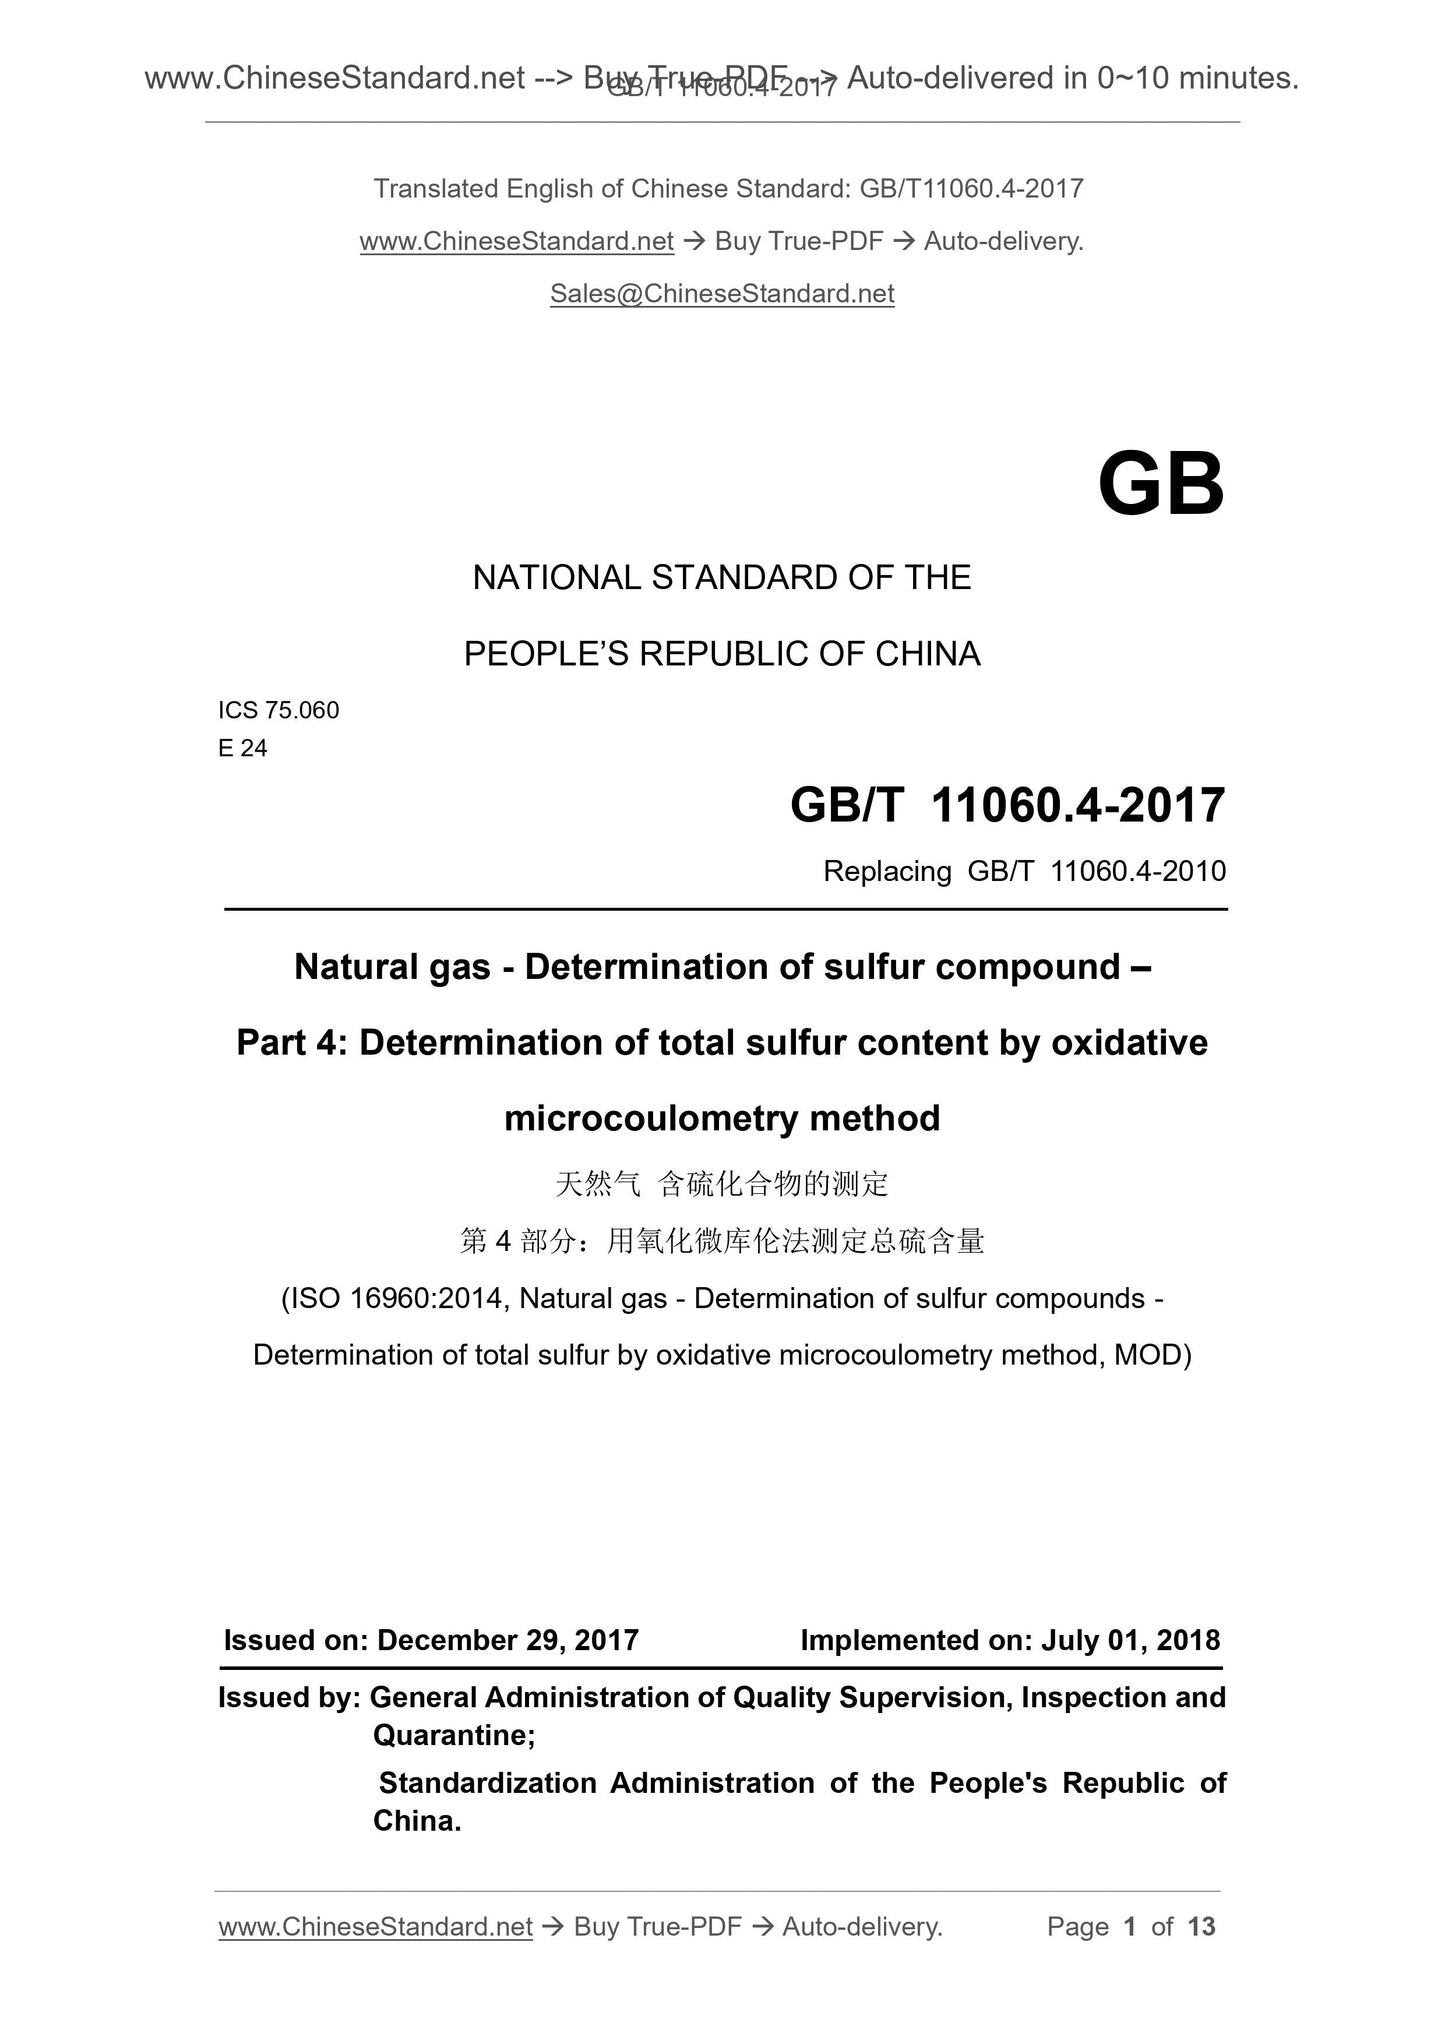 GB/T 11060.4-2017 Page 1